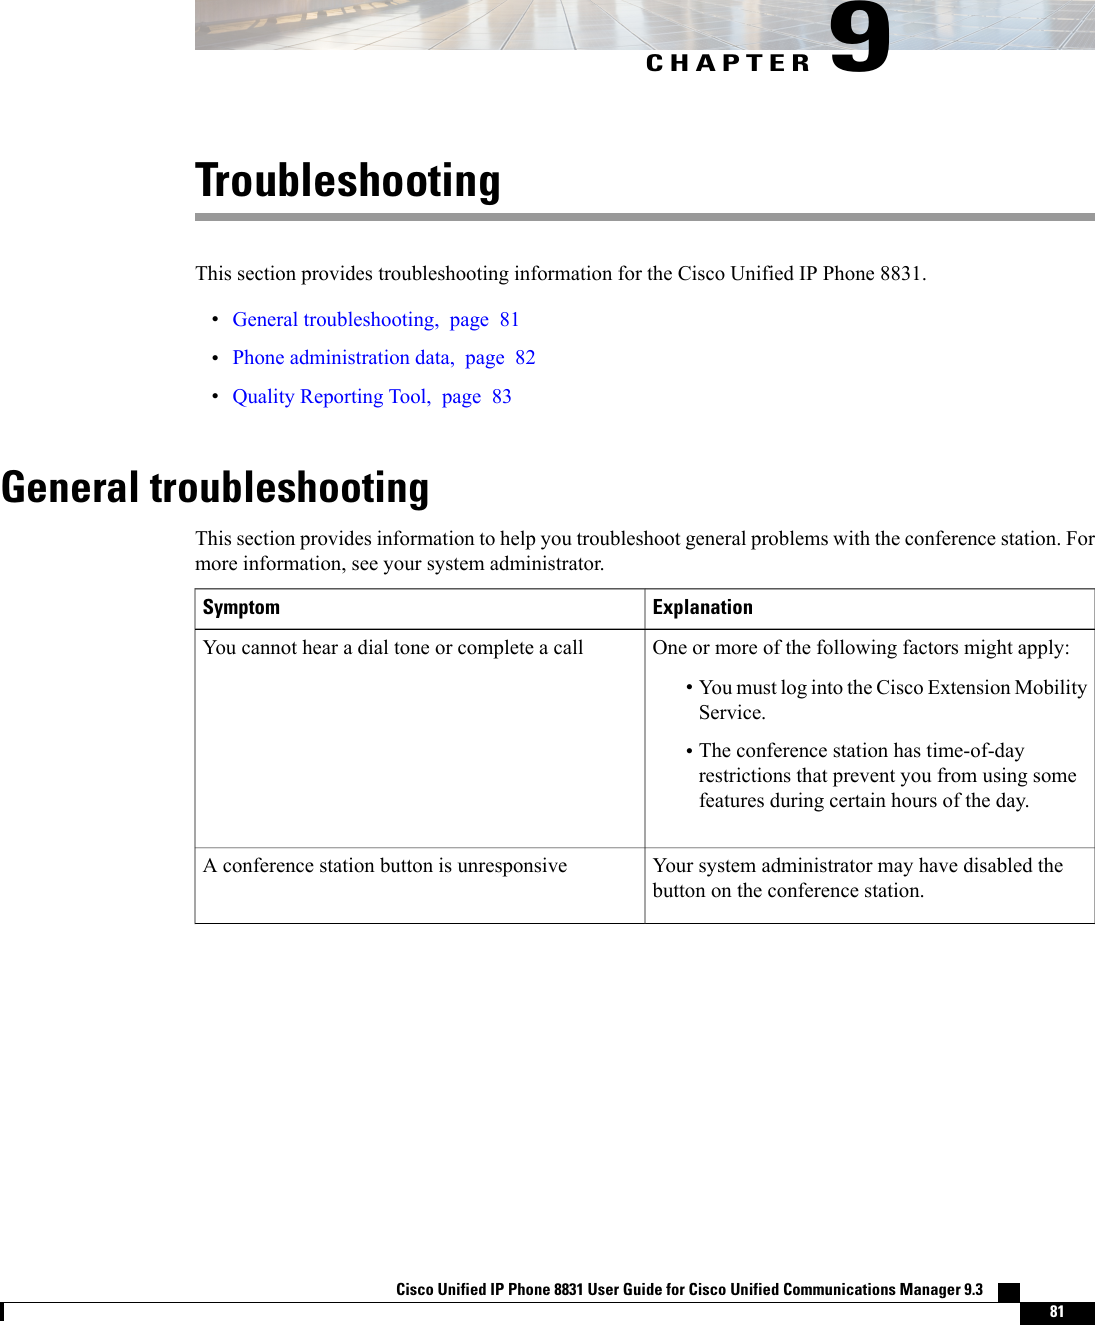 CHAPTER 9TroubleshootingThis section provides troubleshooting information for the Cisco Unified IP Phone 8831.•General troubleshooting, page 81•Phone administration data, page 82•Quality Reporting Tool, page 83General troubleshootingThis section provides information to help you troubleshoot general problems with the conference station. Formore information, see your system administrator.ExplanationSymptomOne or more of the following factors might apply:•You must log into the Cisco Extension MobilityService.•The conference station has time-of-dayrestrictions that prevent you from using somefeatures during certain hours of the day.You cannot hear a dial tone or complete a callYour system administrator may have disabled thebutton on the conference station.A conference station button is unresponsiveCisco Unified IP Phone 8831 User Guide for Cisco Unified Communications Manager 9.3    81